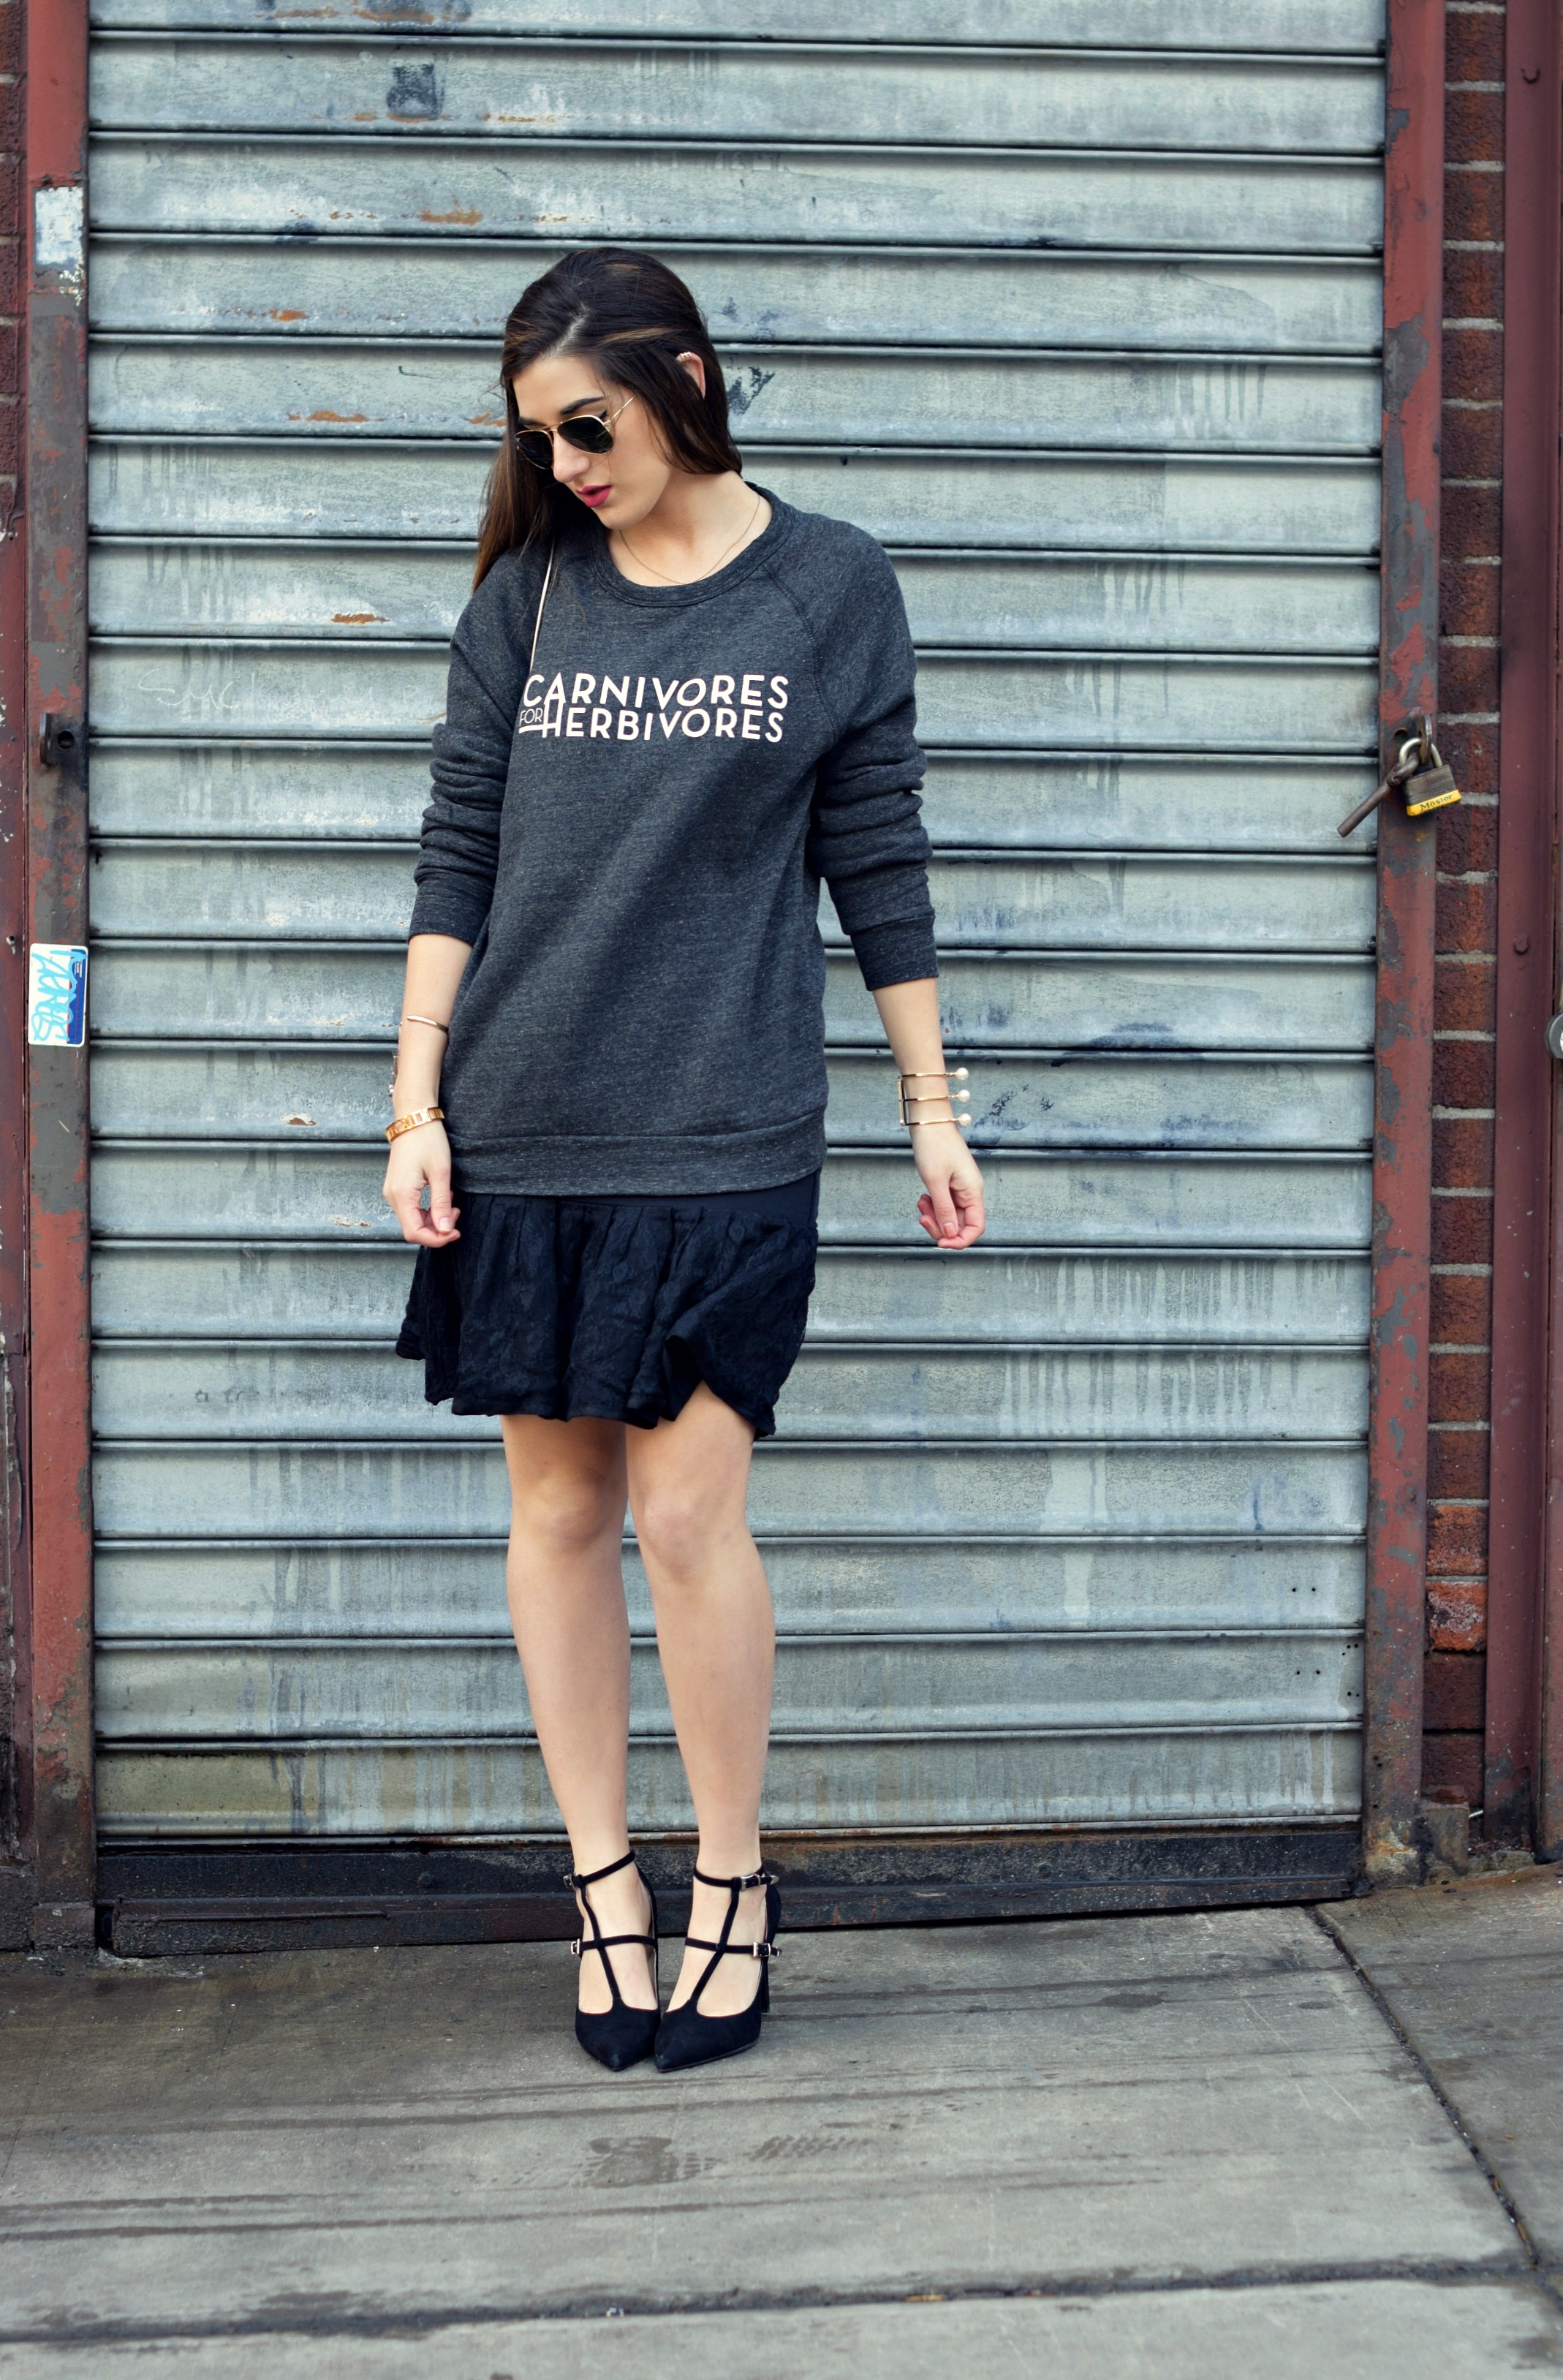 Carnivores For Herbivores Fauxgerty Louboutins & Love Fashion Blog Esther Santer NYC Street Style Blogger Animal Lover Cruelty Free Suede Vegan Leather RayBan Aviators Sunglasses Grey Sweatshirt Lace Skirt Girl Women OOTD Outfit USA Outerwear Shop.jpg